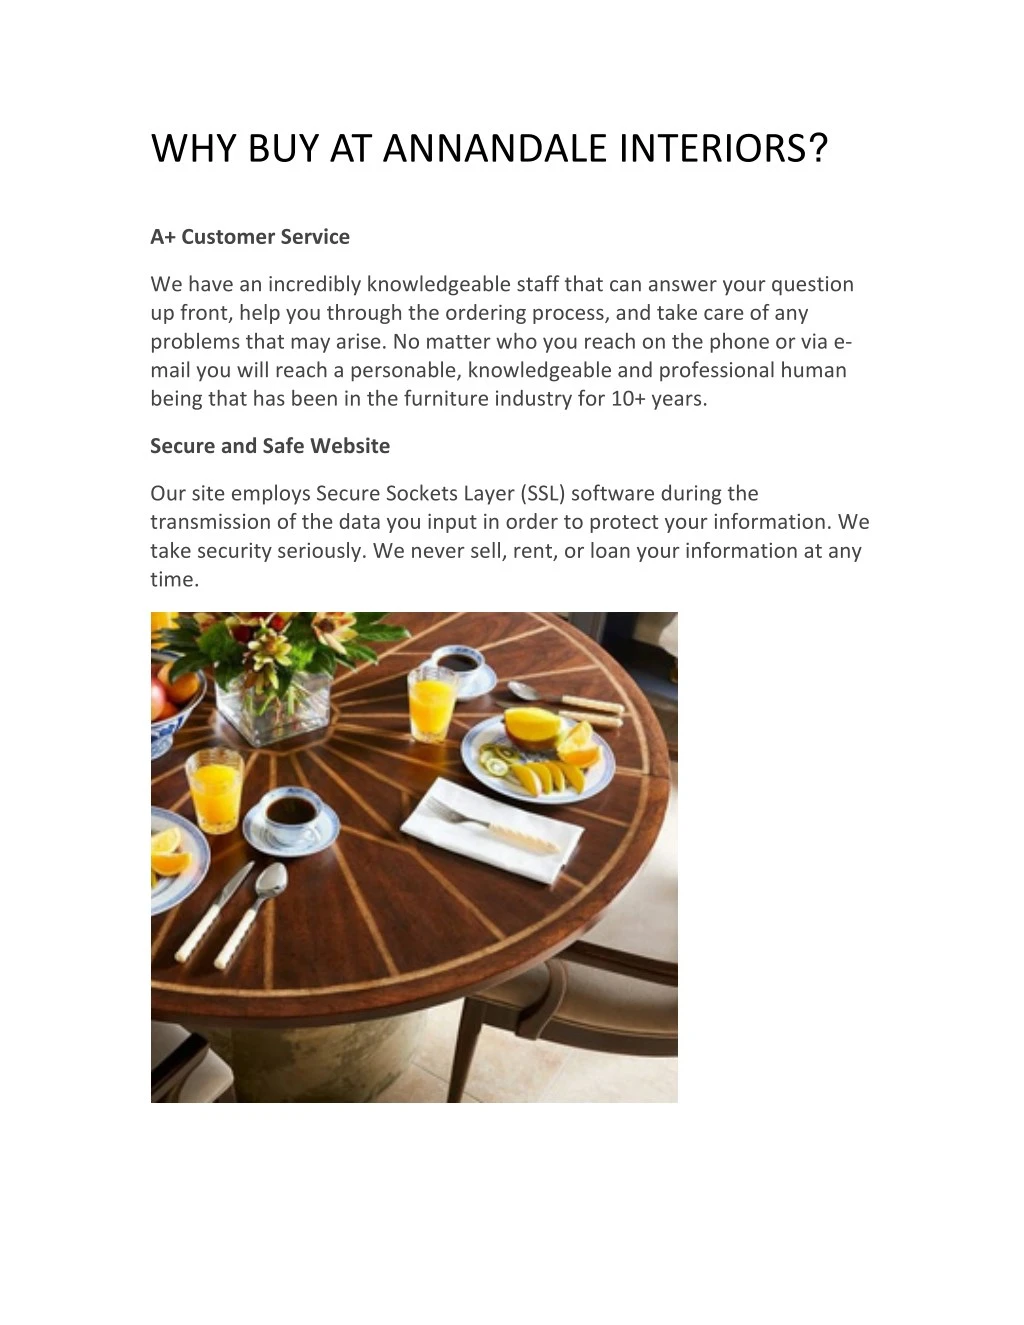 why buy at annandale interiors